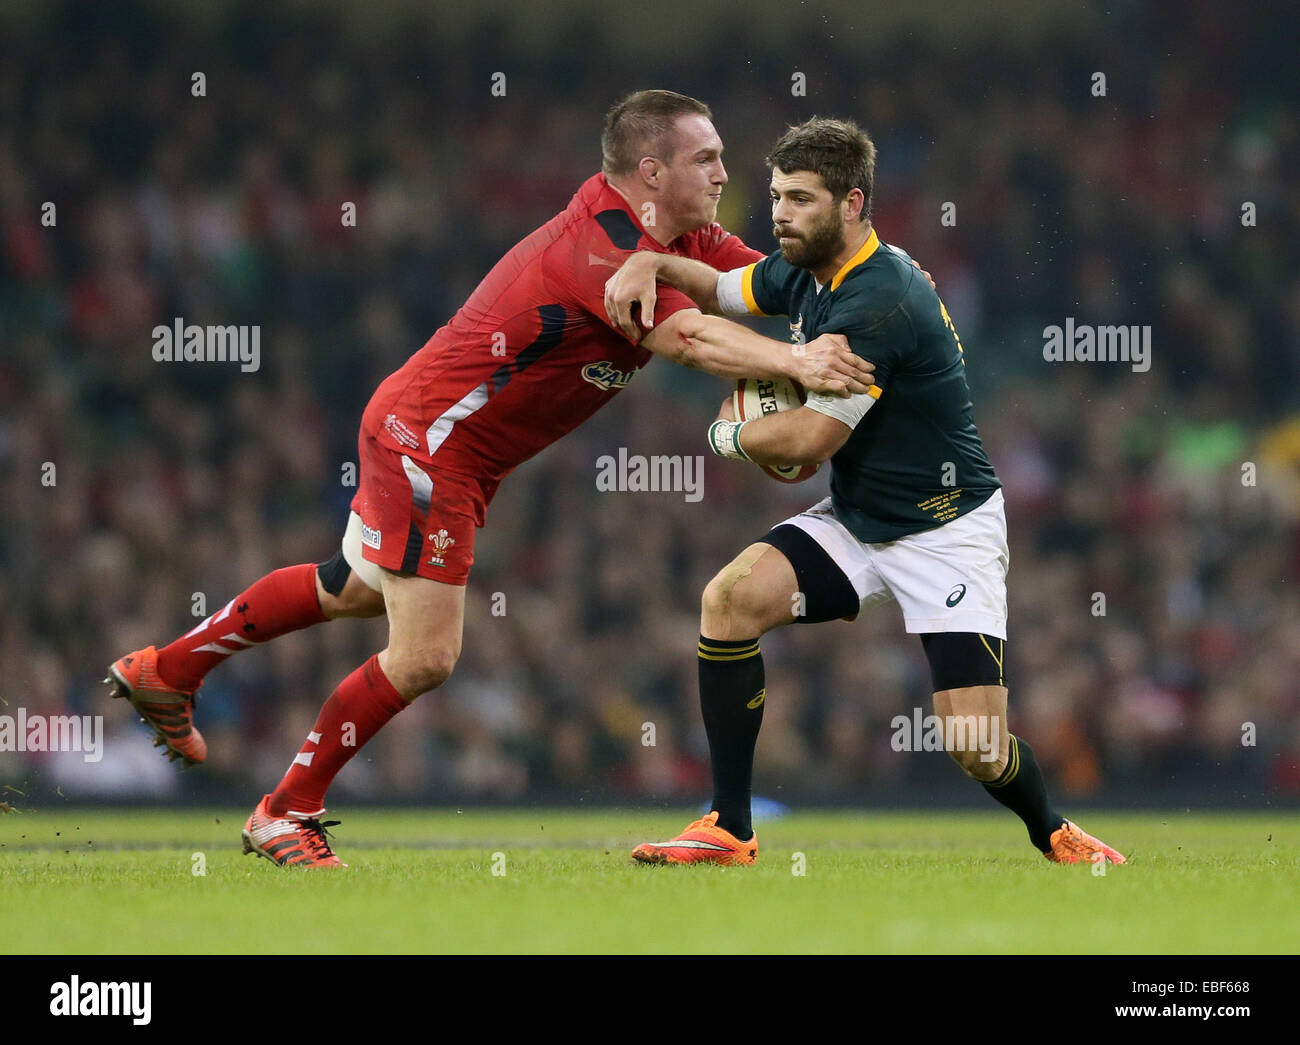 Cardiff, UK. 29th Nov, 2014. Gethin Jenkins of Wales tackles Willie le Roux of South Africa - Autumn Internationals - Wales vs South Africa - Millennium Stadium - Cardiff - Wales - 29th November 2014 - Picture Simon Bellis/Sportimage. Credit:  csm/Alamy Live News Stock Photo